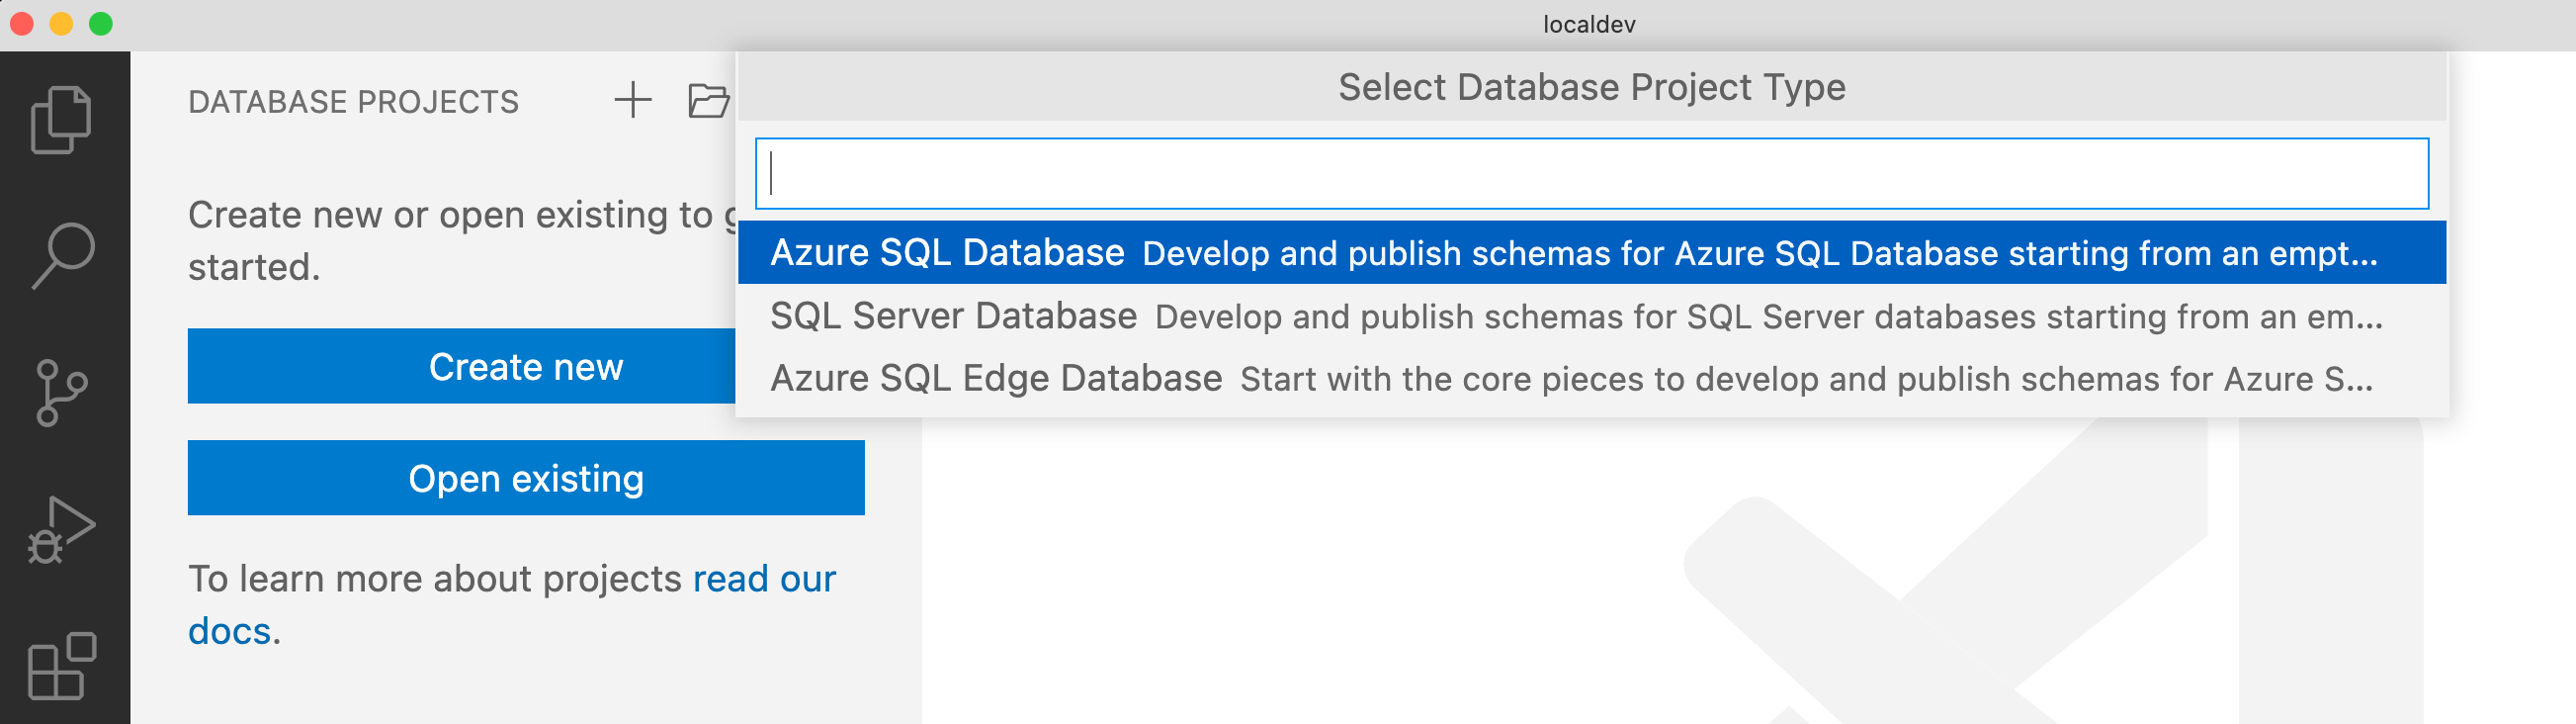 Screenshot of selecting the project type for a Database Project in Visual Studio Code.